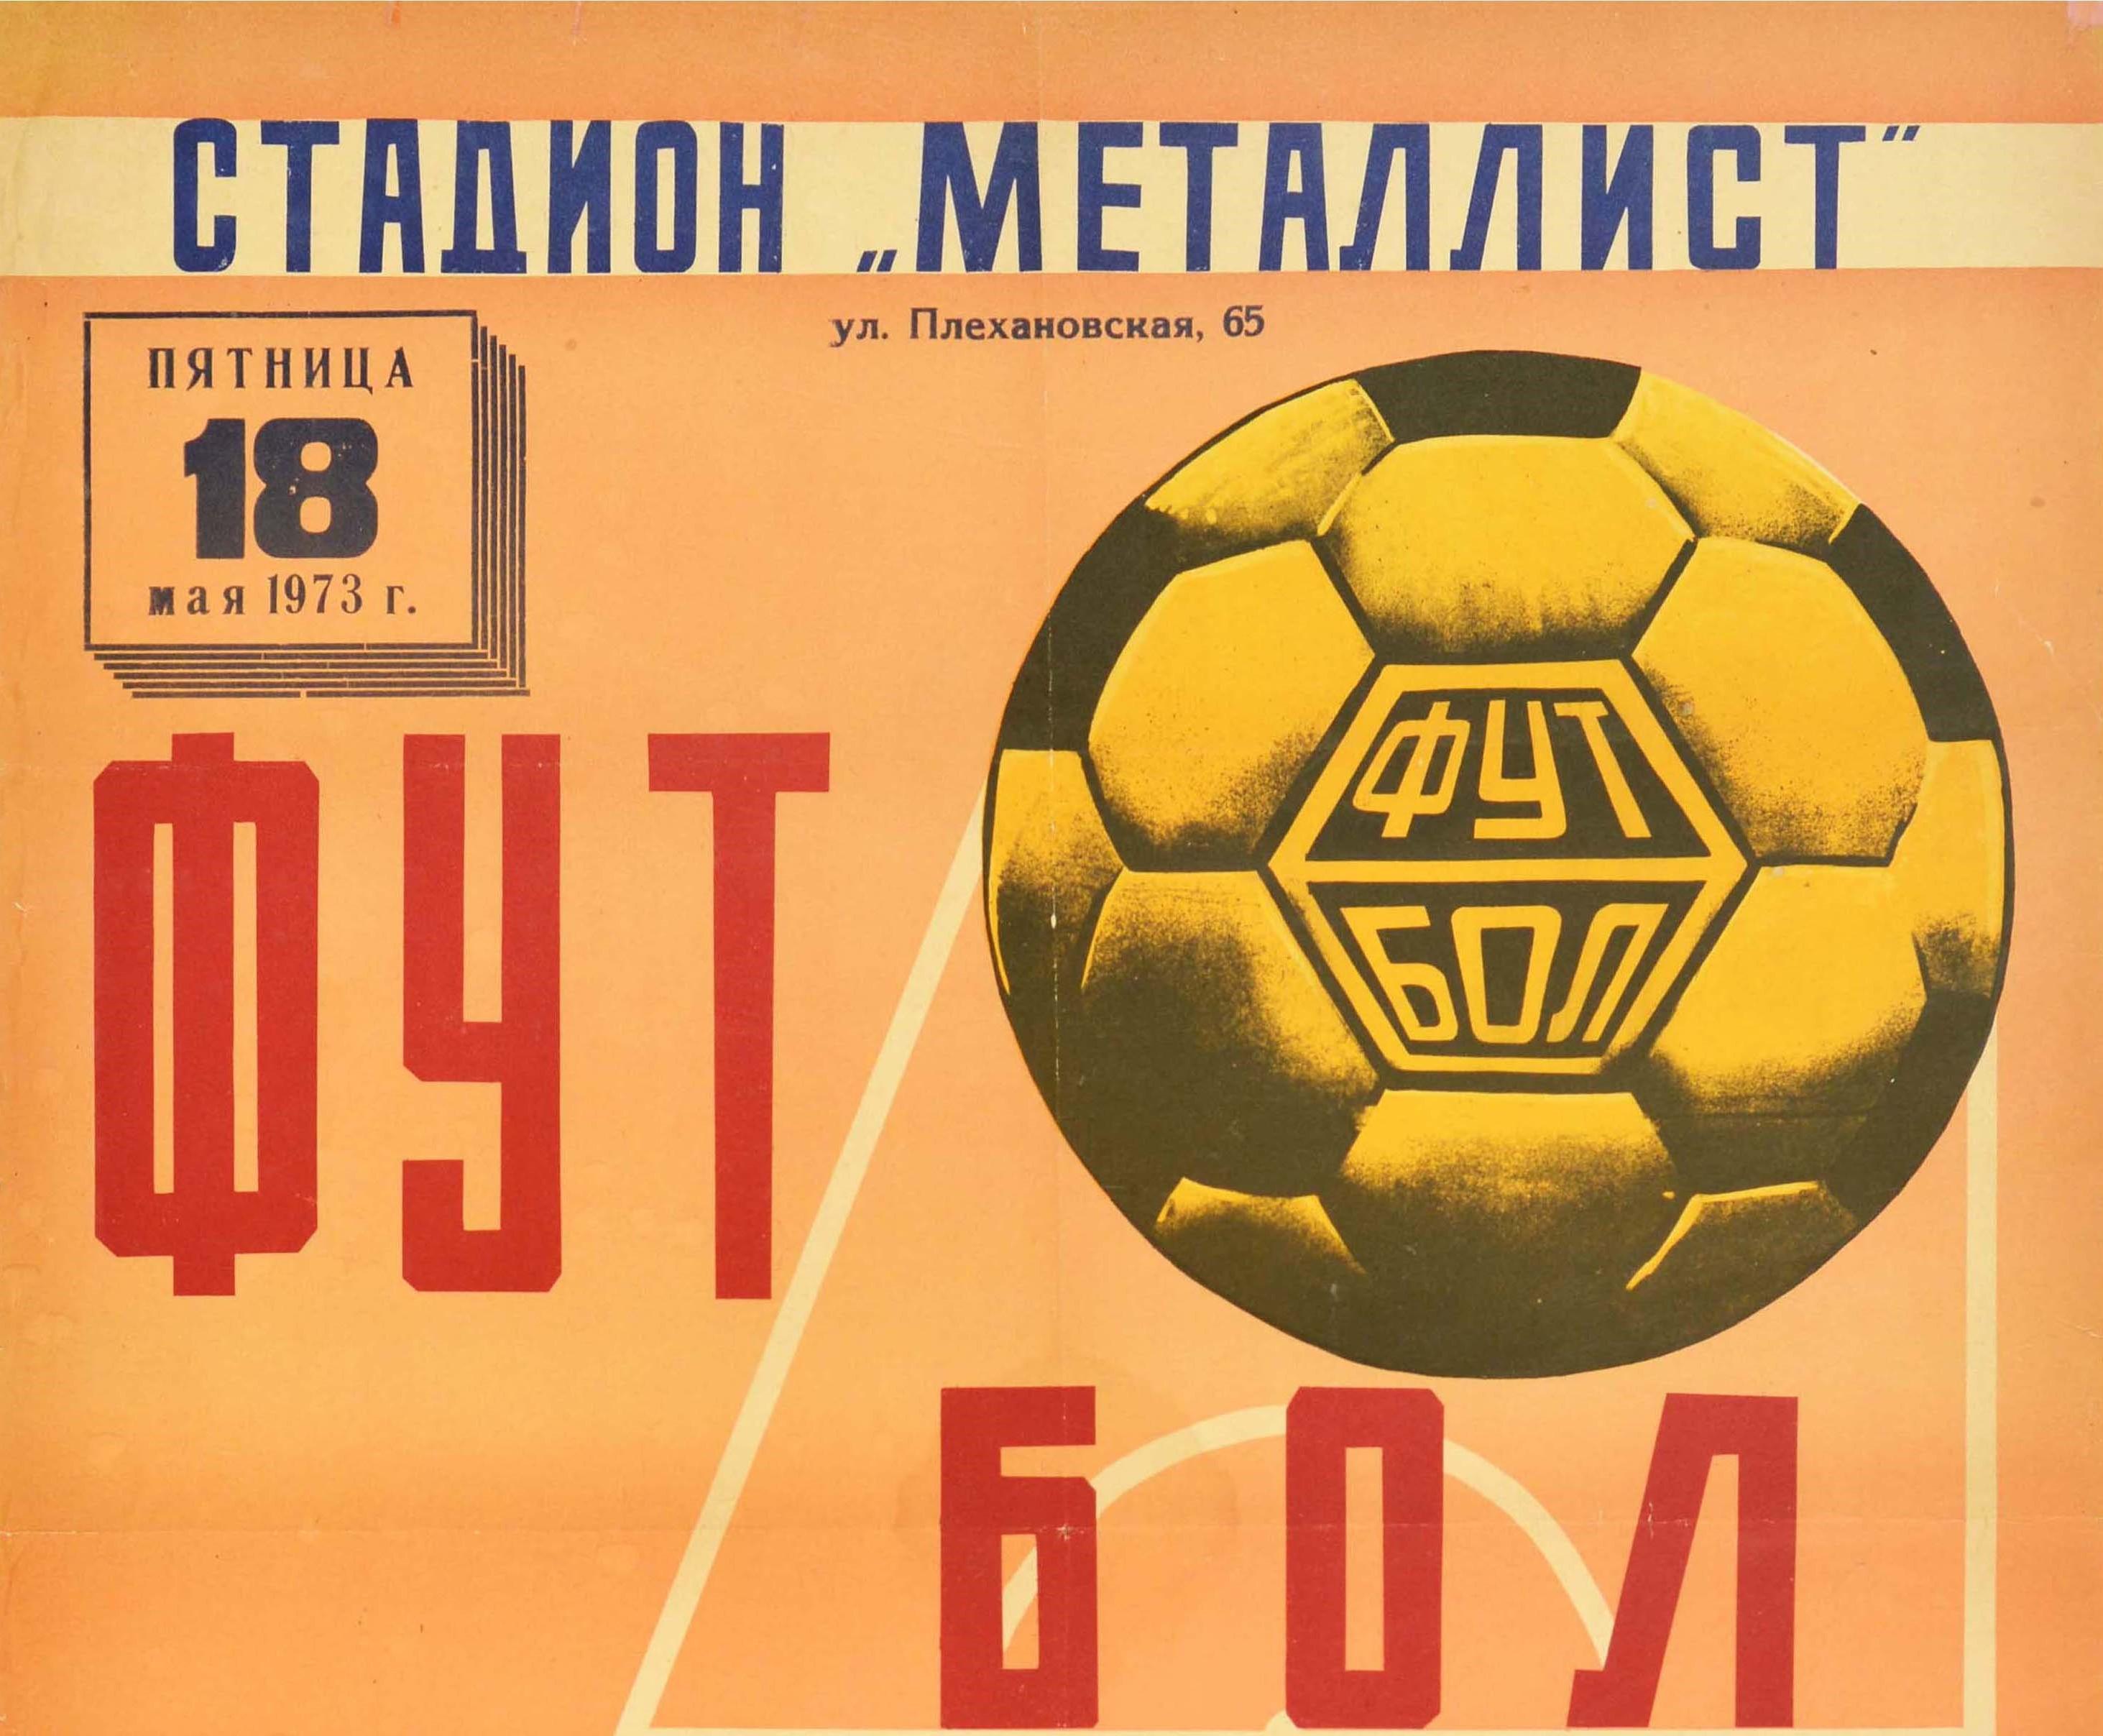 Original vintage Soviet sports event poster for the XXXV USSR Football Championship match Class A teams Metallist vs Spartak at the Metallist Stadium on Friday 18 May 1973 starting at 6pm featuring a great design depicting a yellow gold and black